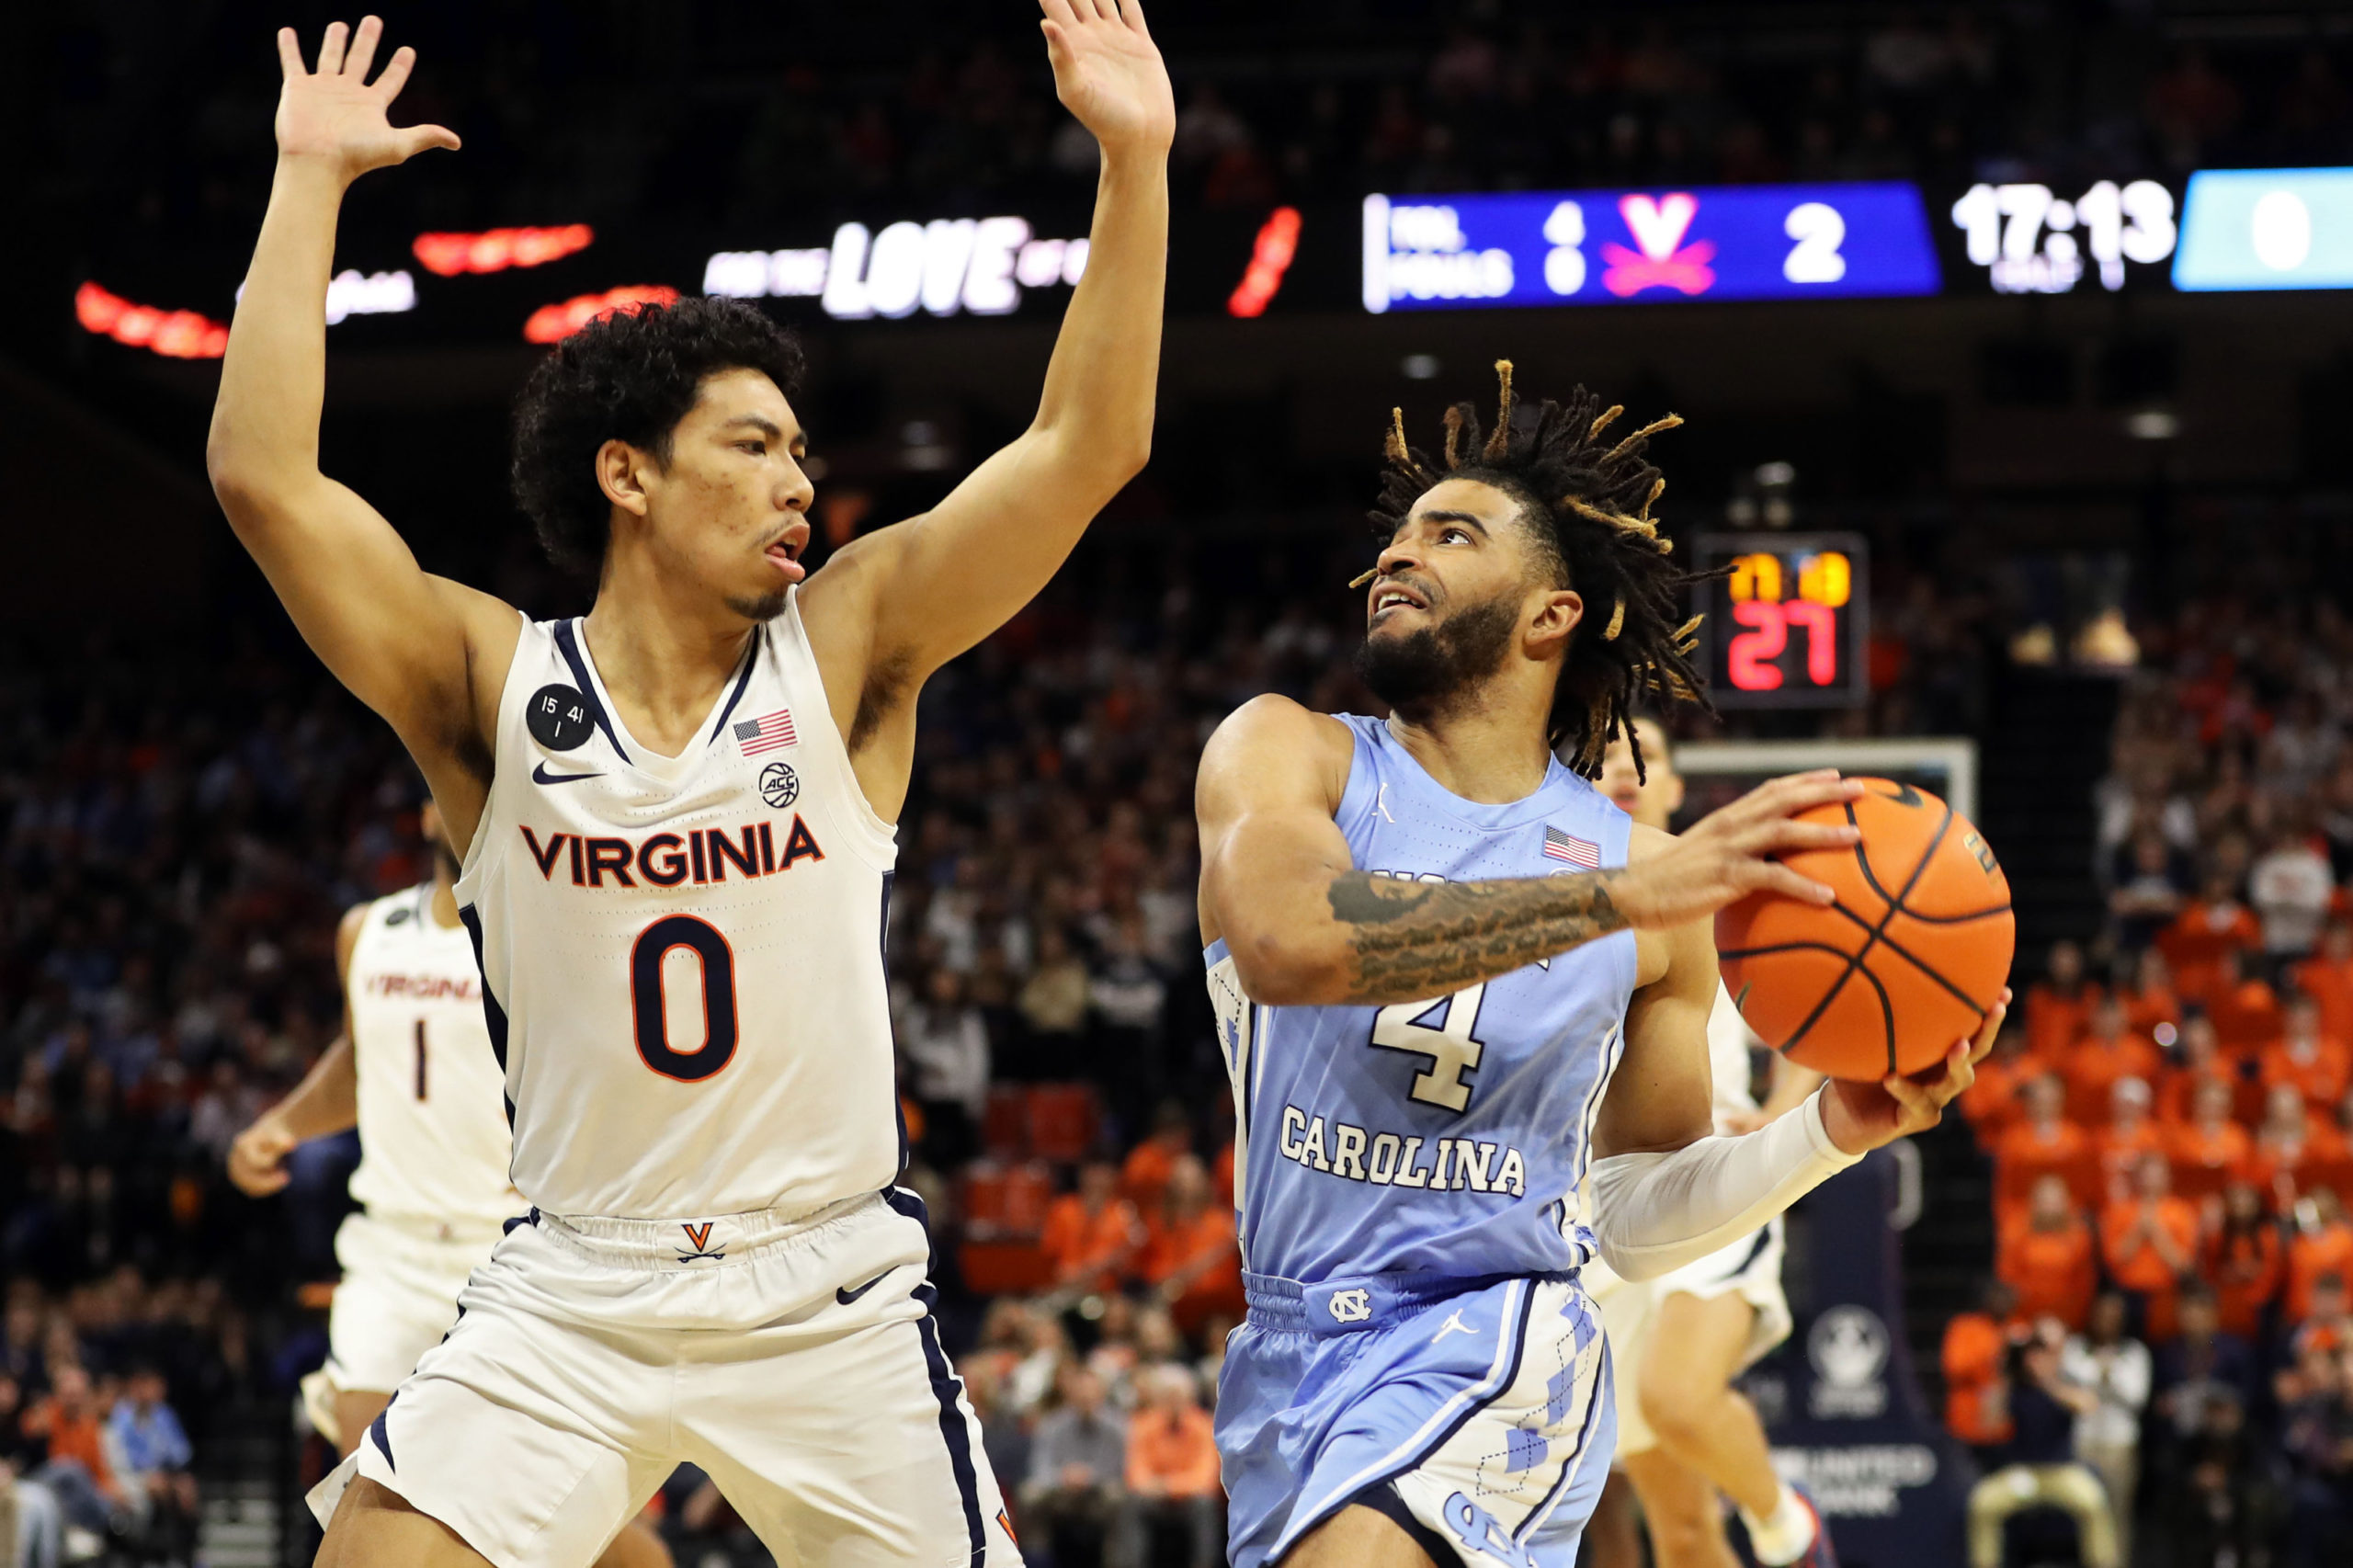 What Happened to UNC Basketball?